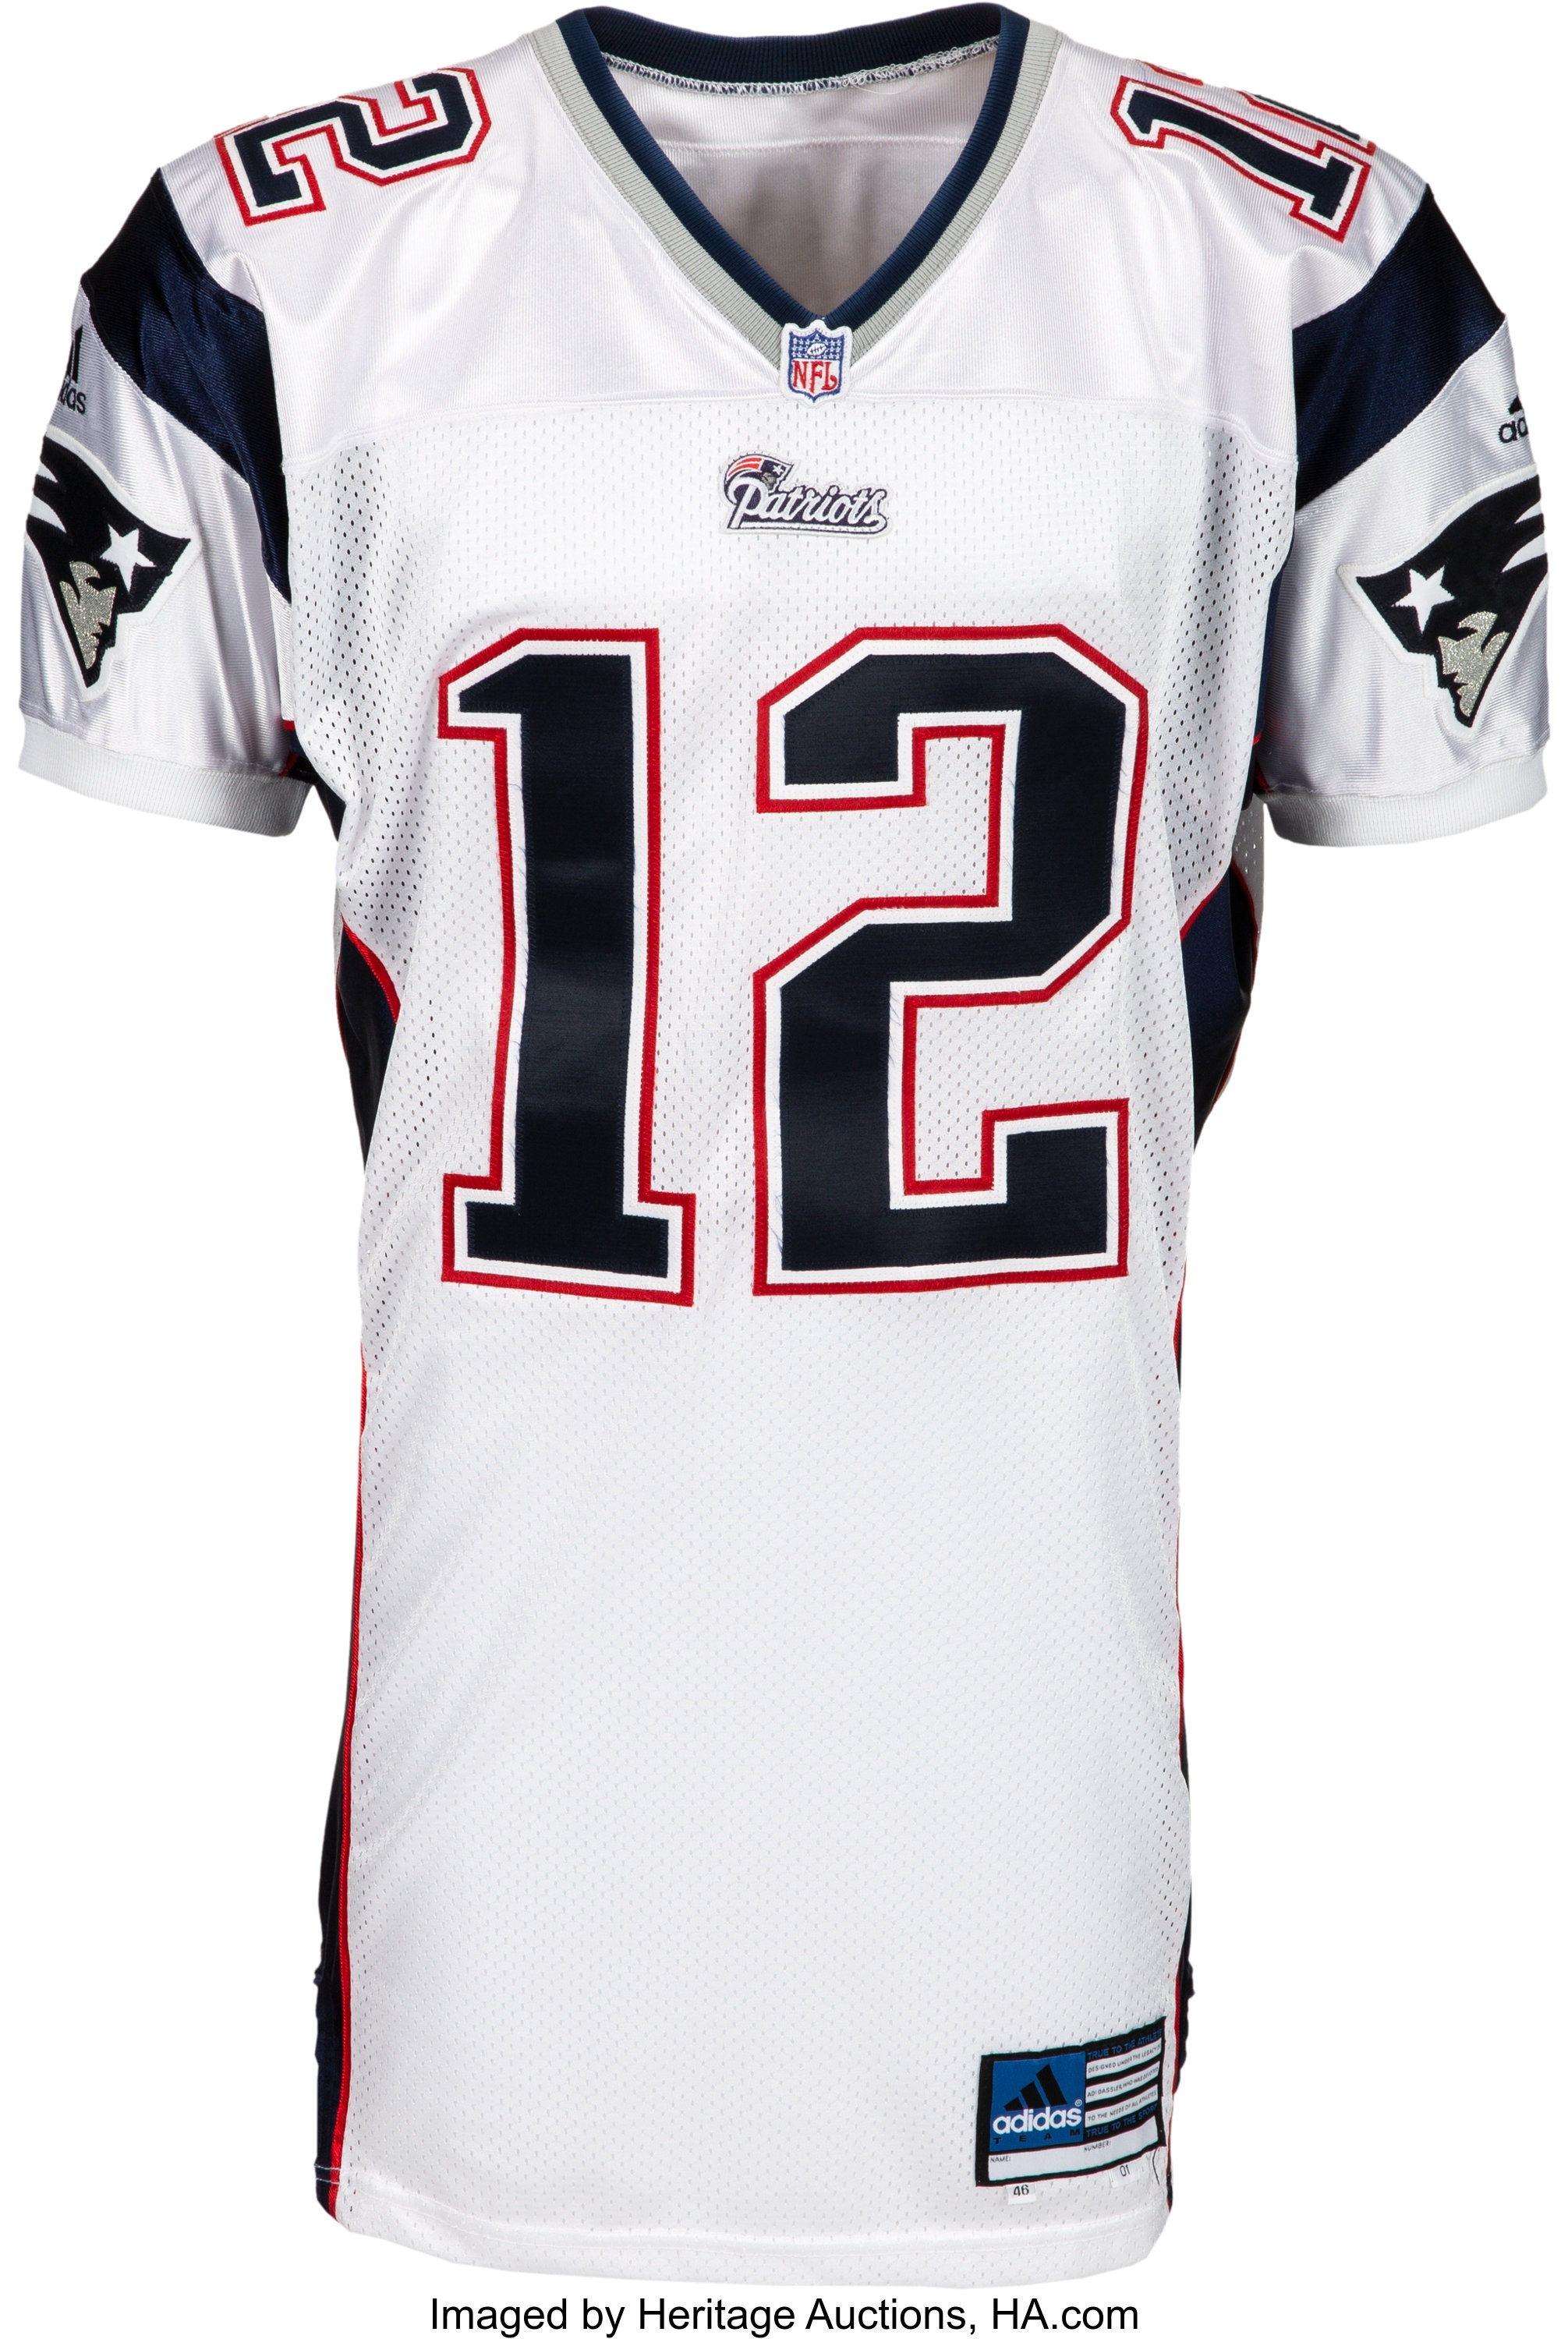 Tom Brady's last game-worn jersey is being sold at an auction: How